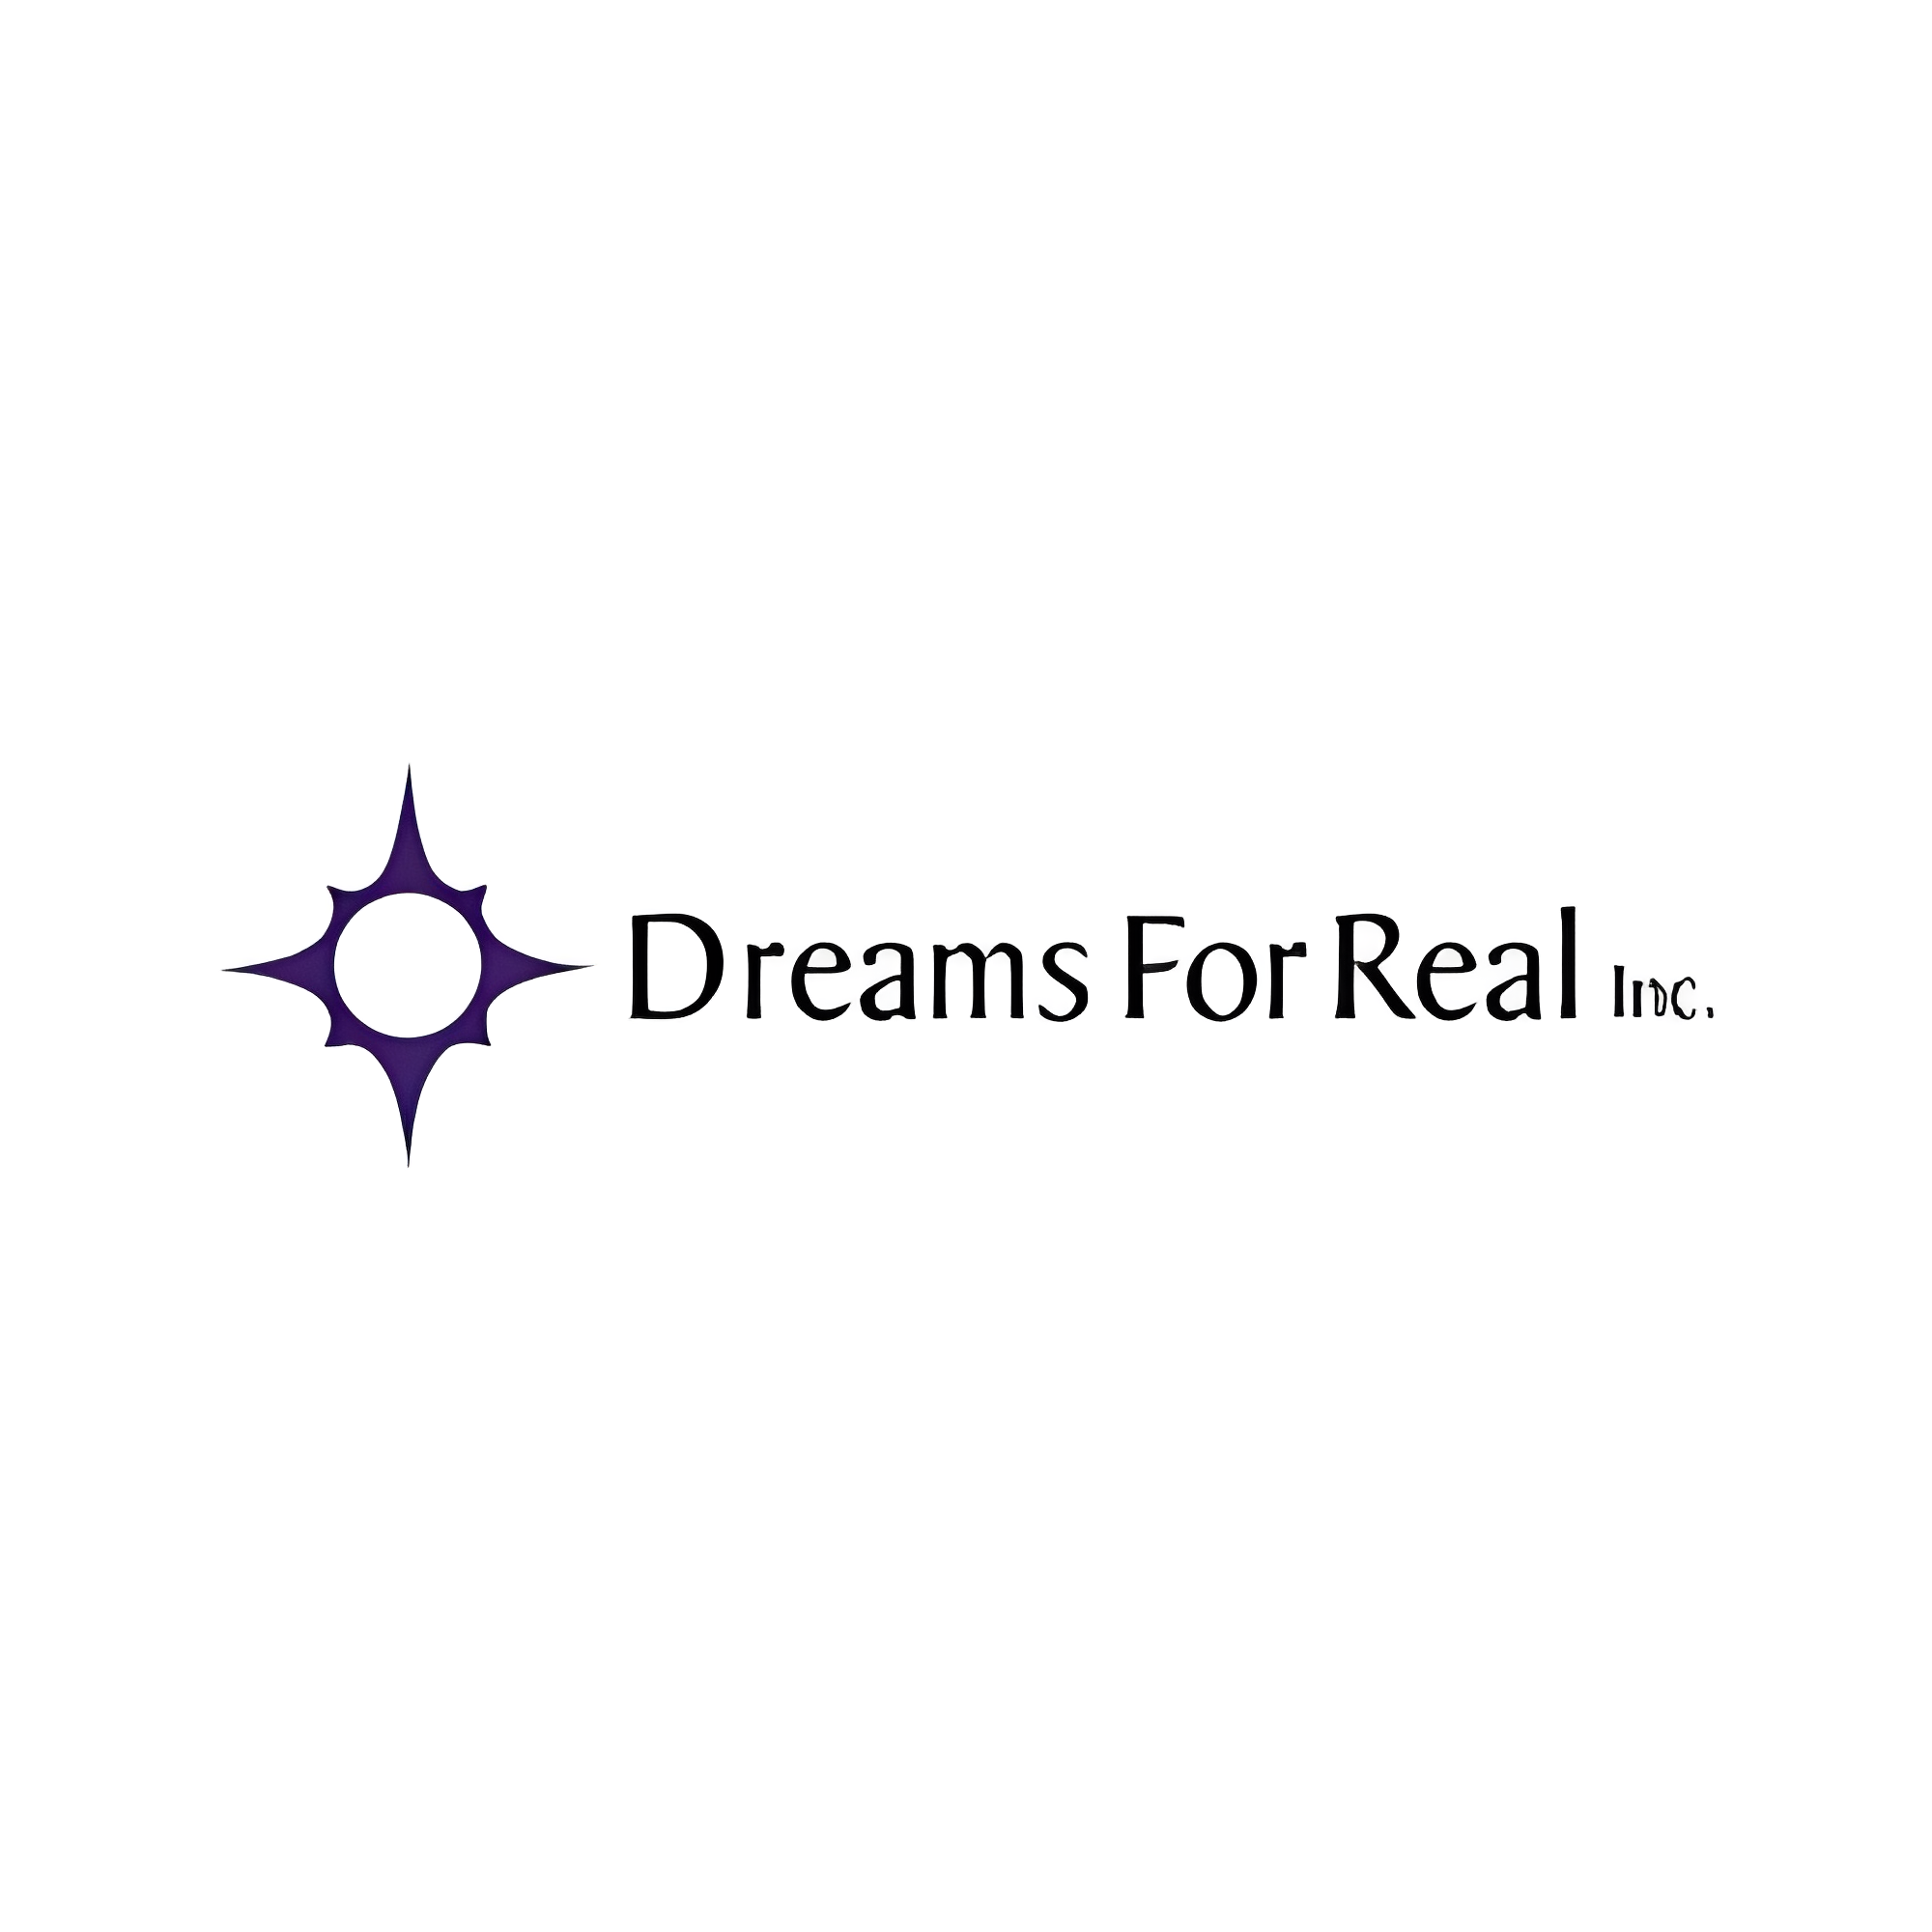 Dreams for Real Inc